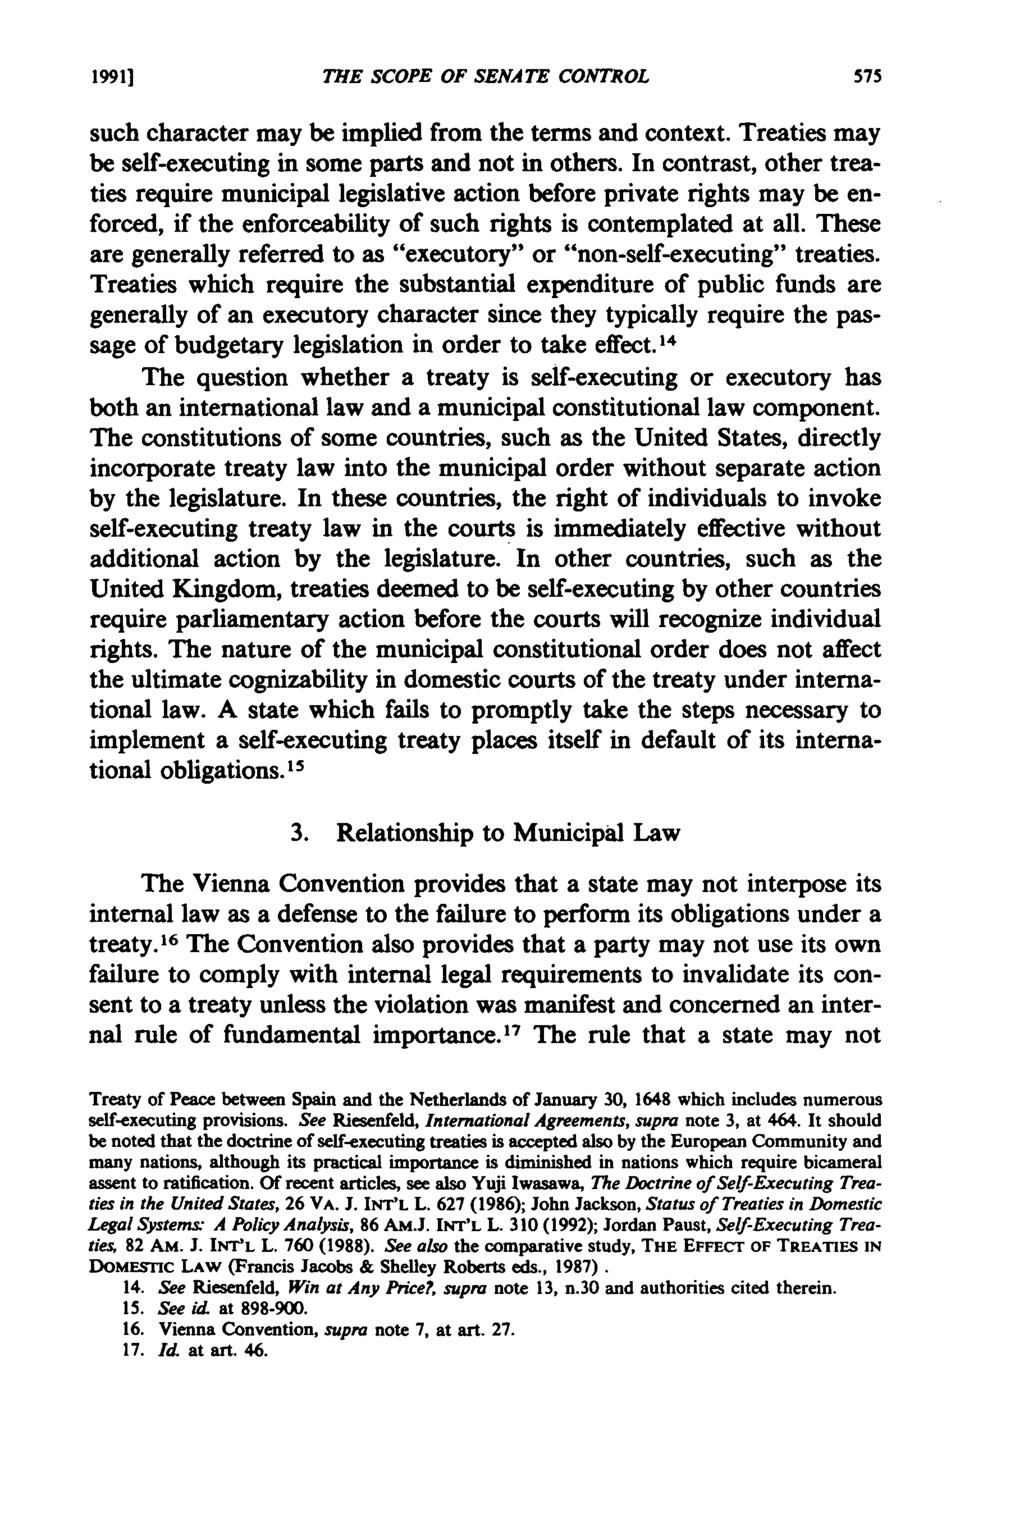 1991] THE SCOPE OF SENATE CONTROL such character may be implied from the terms and context. Treaties may be self-executing in some parts and not in others.